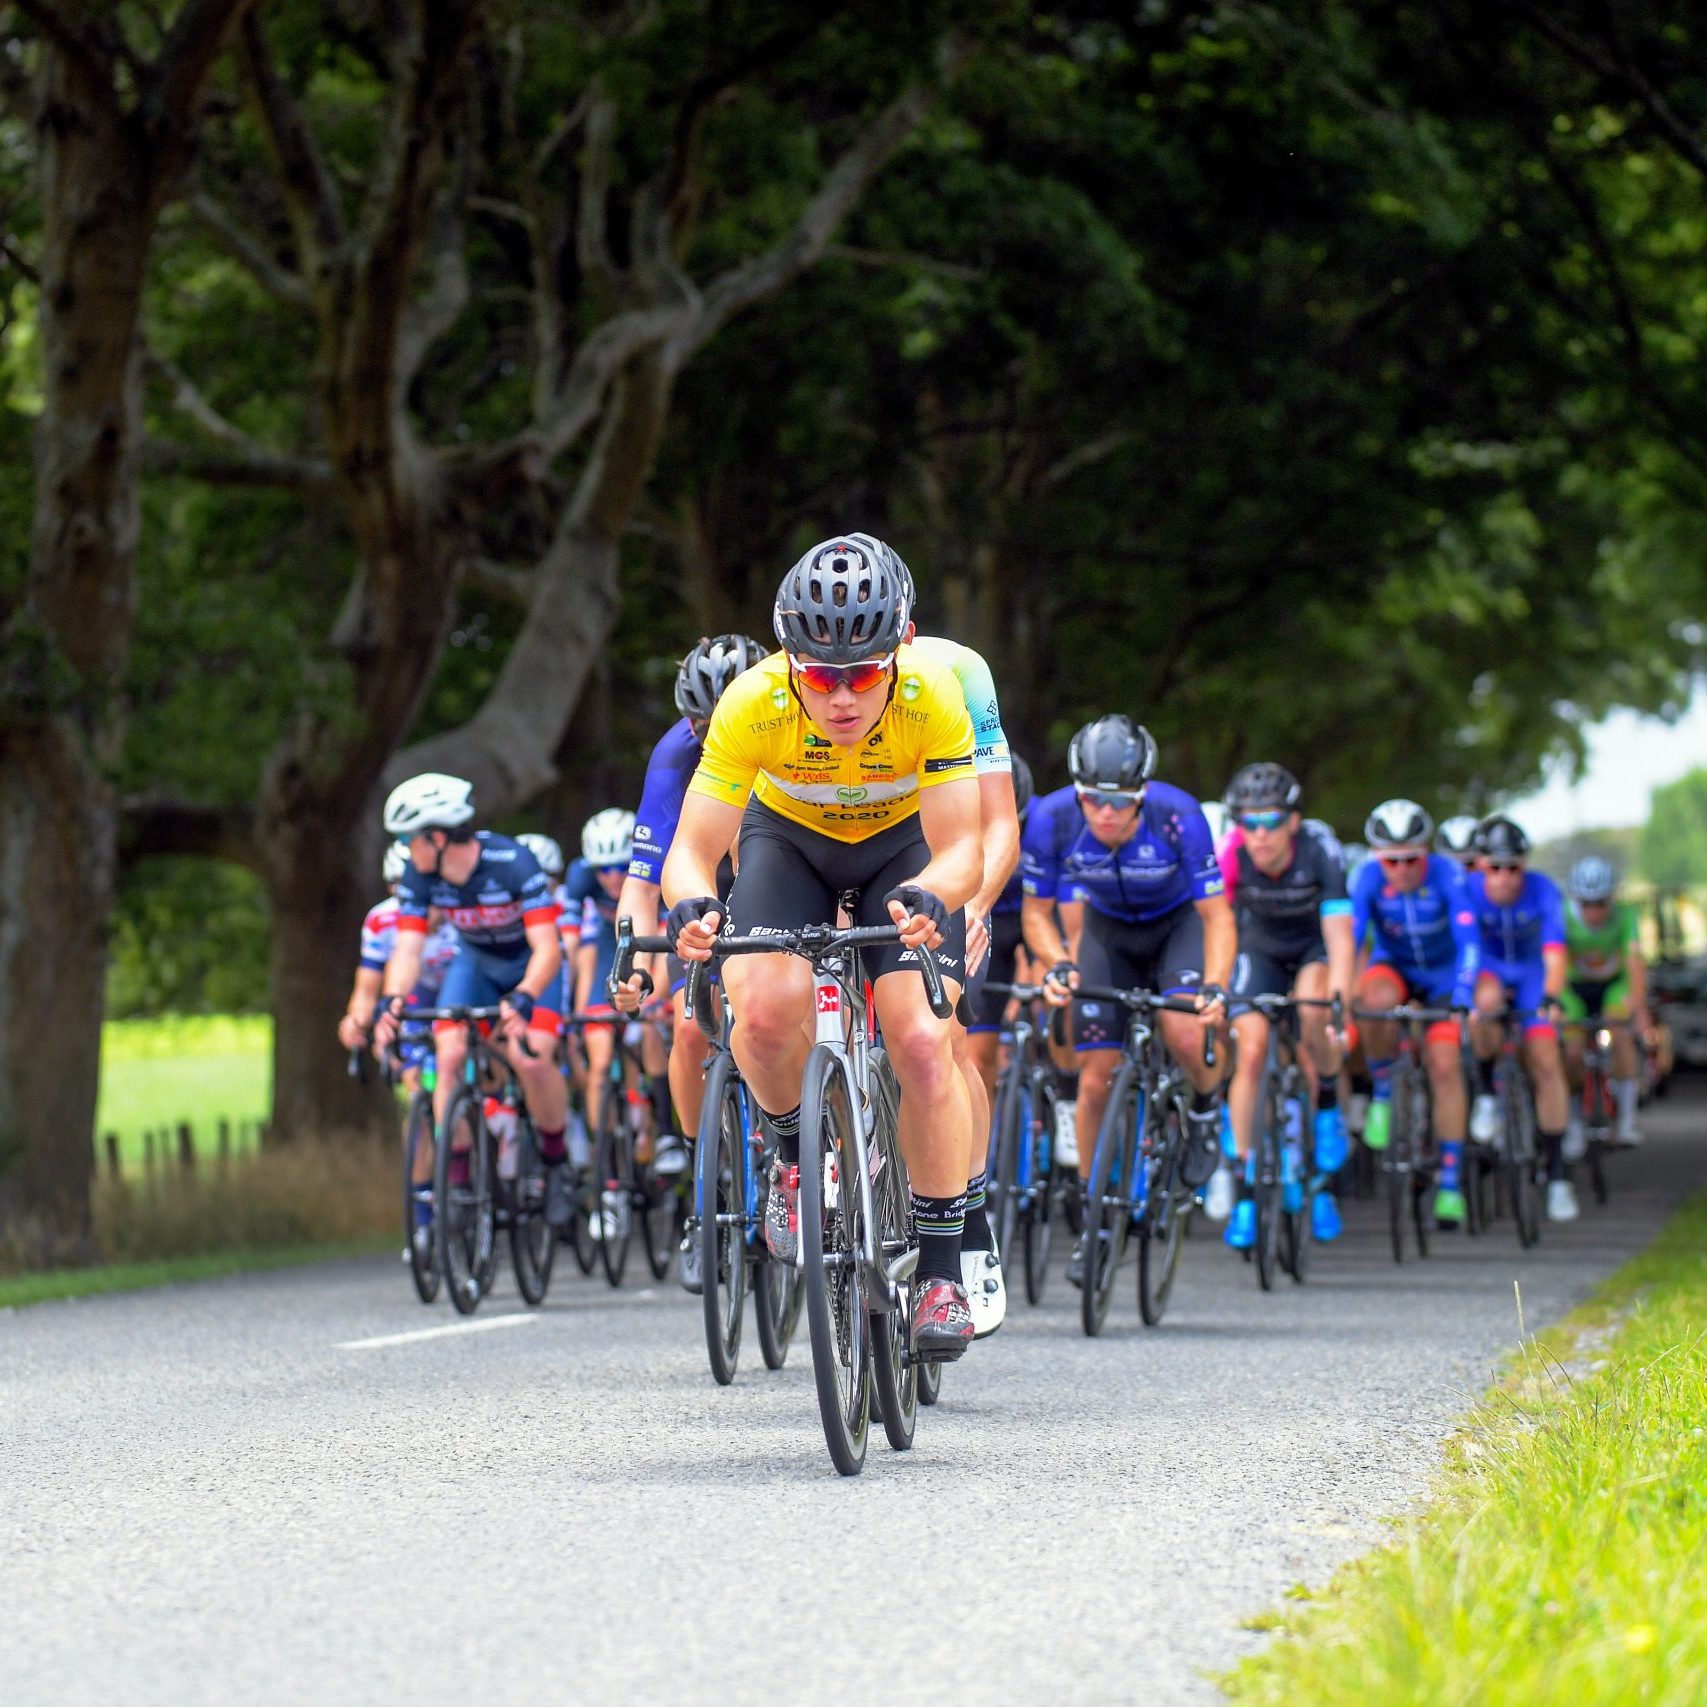 Jensen Plowright (Australia/Team BridgeLane) leads the peloton during stage four of the NZ Cycle Classic UCI Oceania Tour (Te Wharau-Admiral Hill Queen Stage) in Wairarapa, New Zealand on Saturday, 18 January 2020. Photo: Dave Lintott / lintottphoto.co.nz